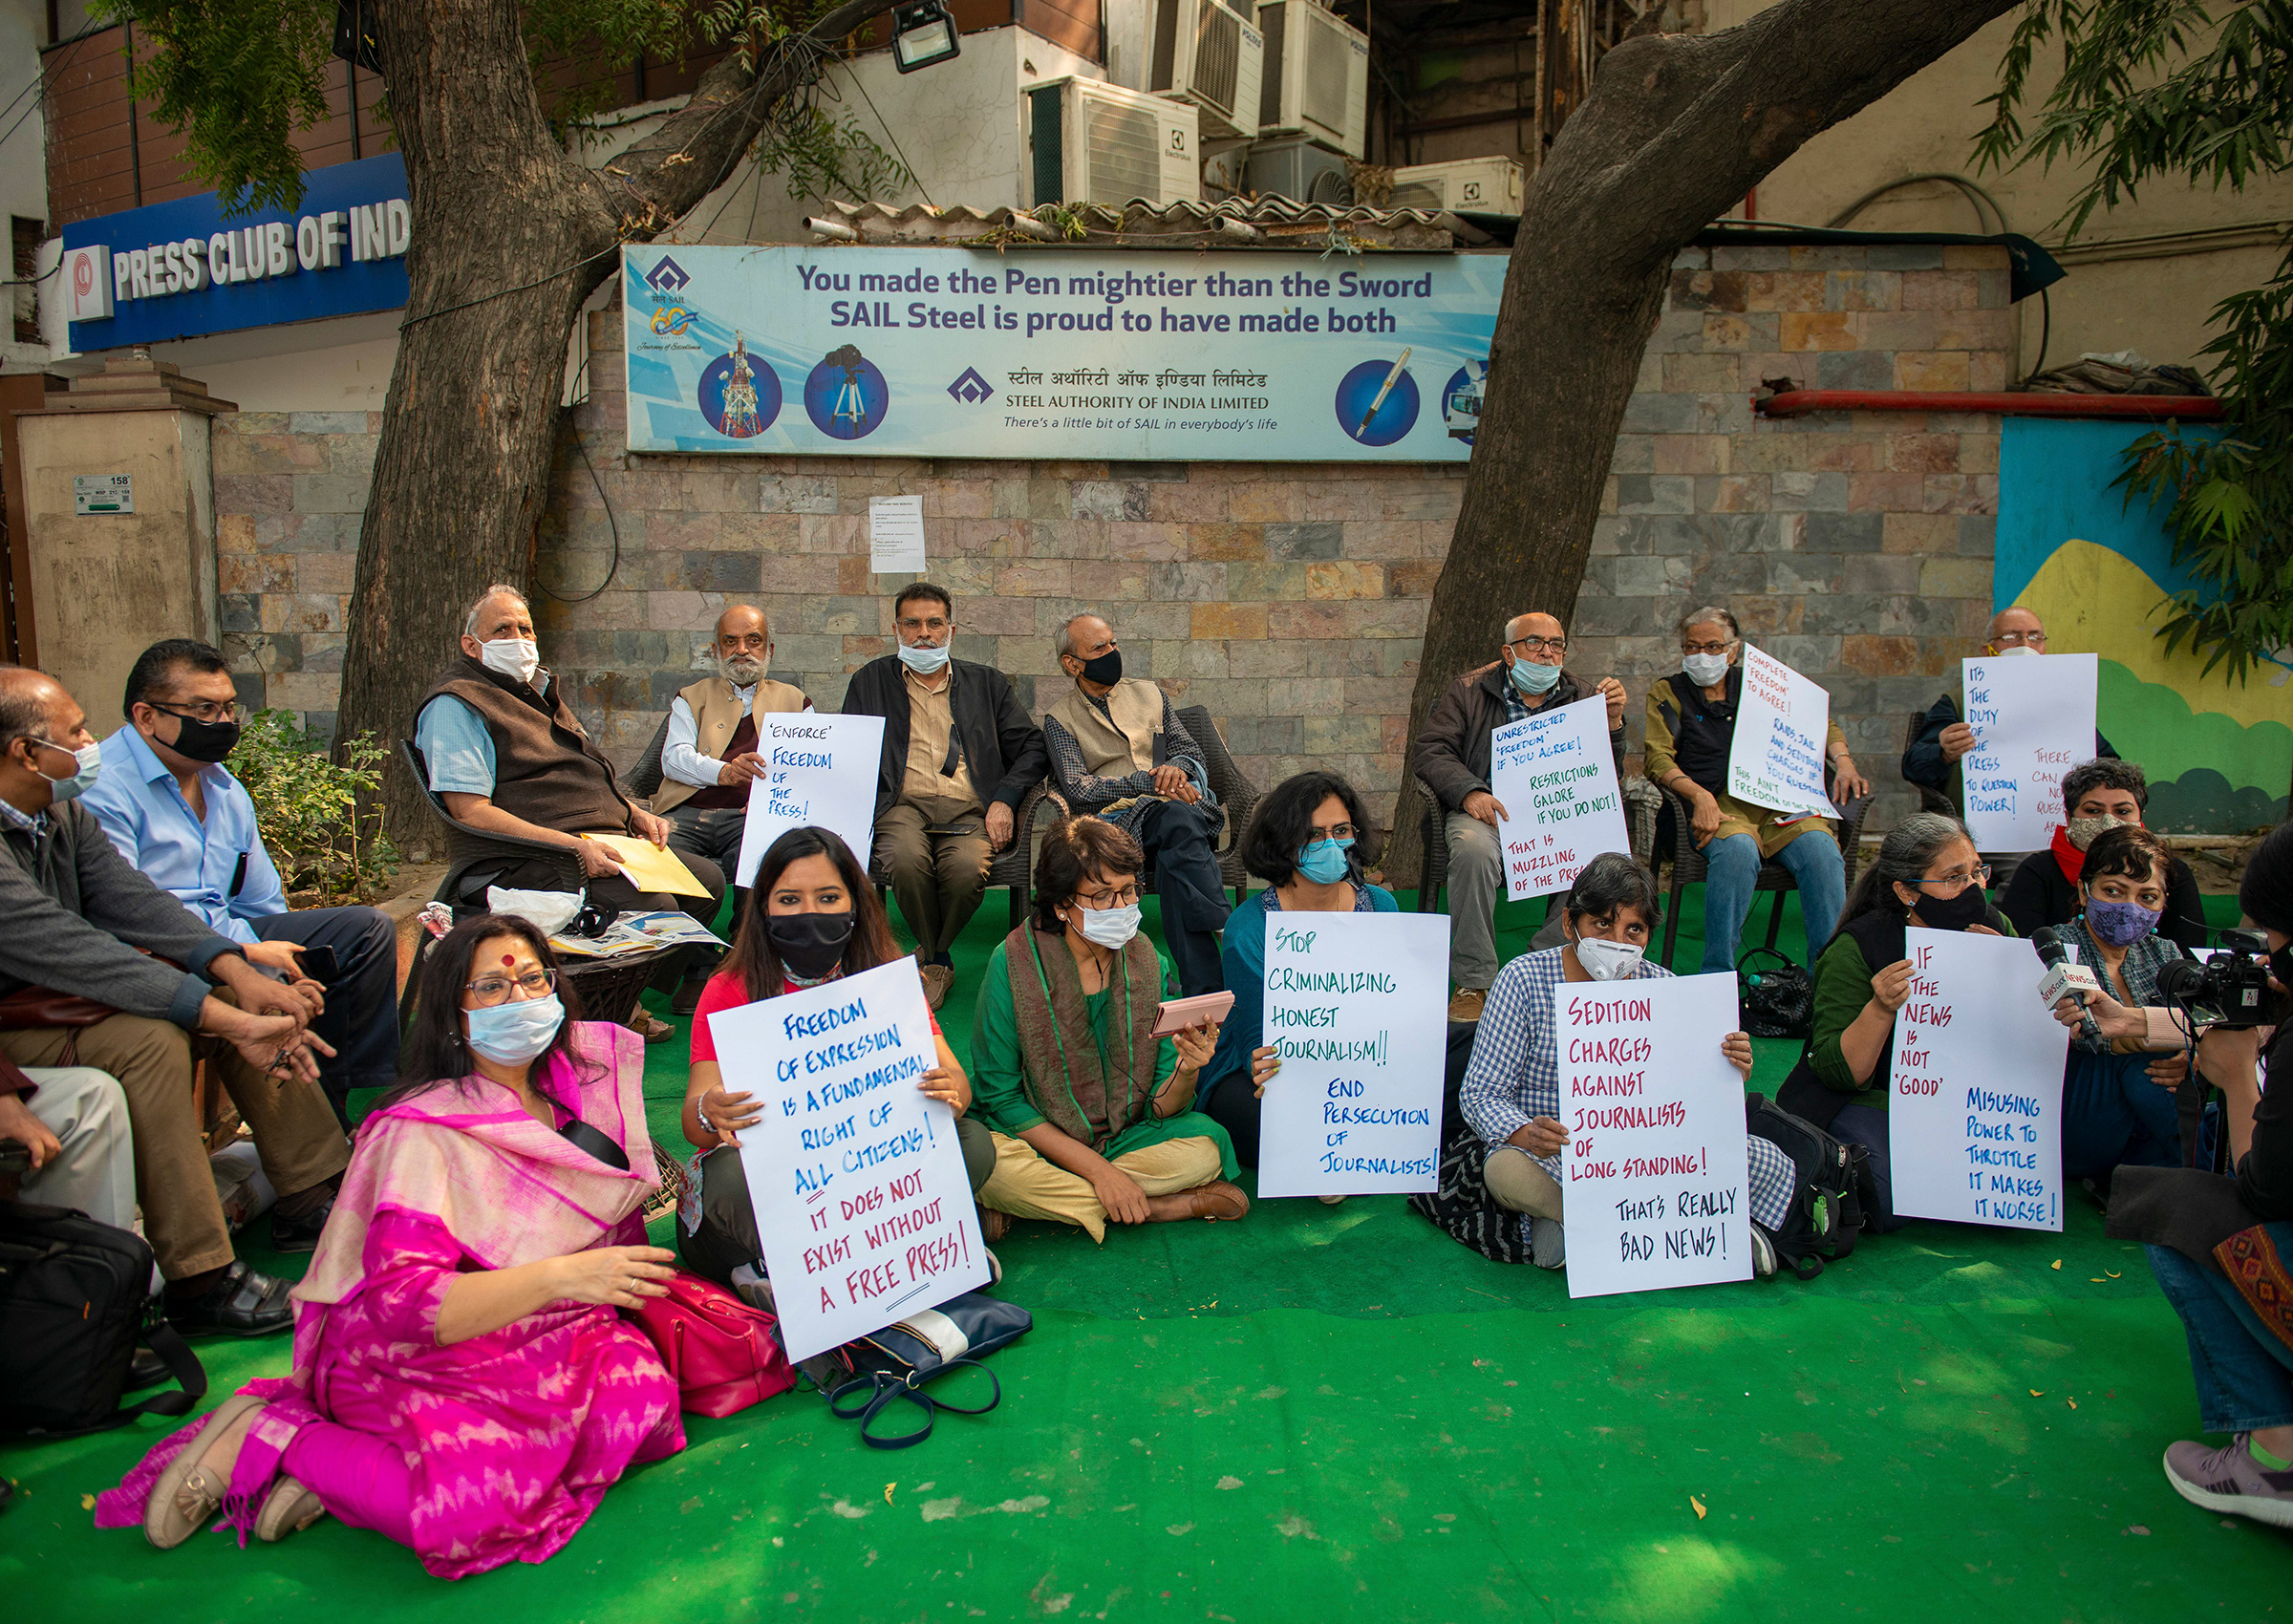 Various journalists' organizations staged a silent sit-in protest against media gagging outside the Press Club of India in New Delhi on Feb 18. (Pradeep Gaur—SOPA Images/Shutterstock)